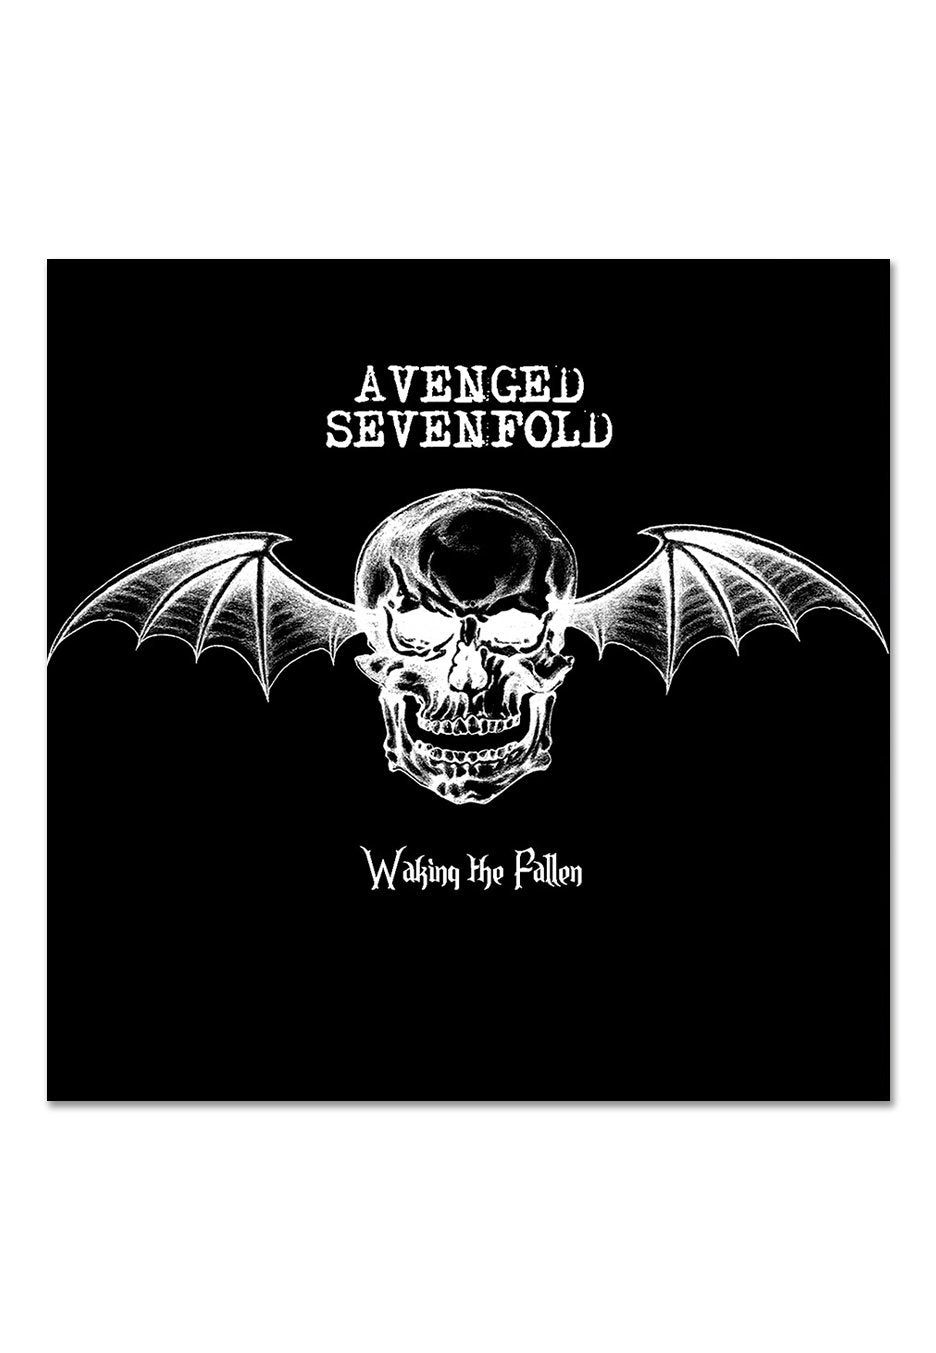 Avenged Sevenfold - Waking The Fallen 20th Anniversary Gold - Colored Vinyl